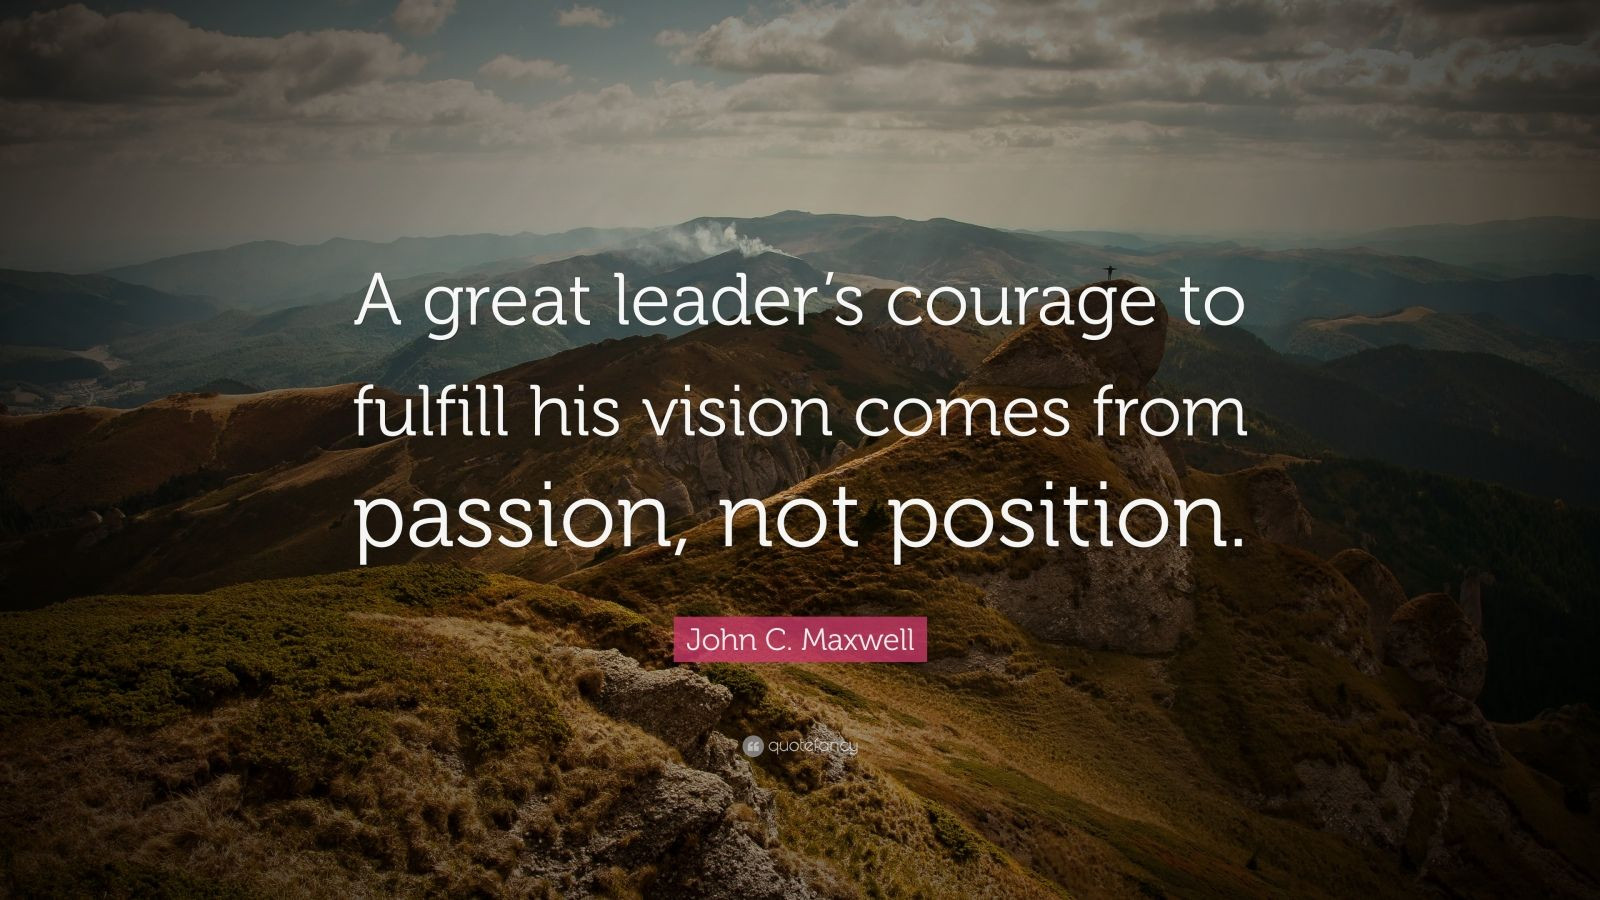 John C Maxwell Leadership Quotes
 John C Maxwell Quote “A great leader’s courage to